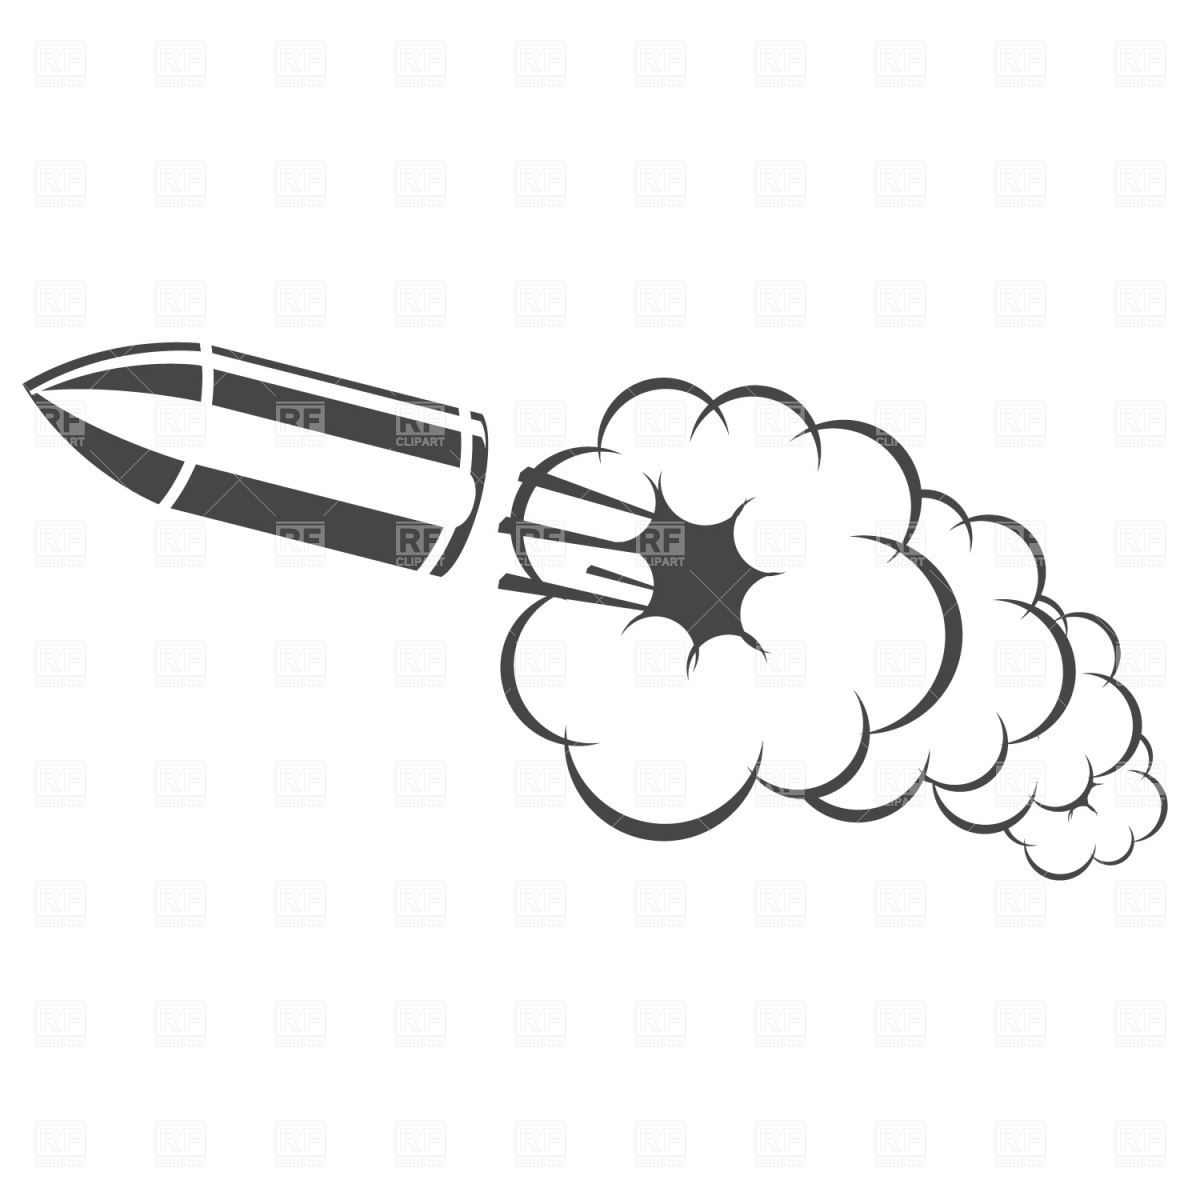 Free collection download and. Bullet clipart vector